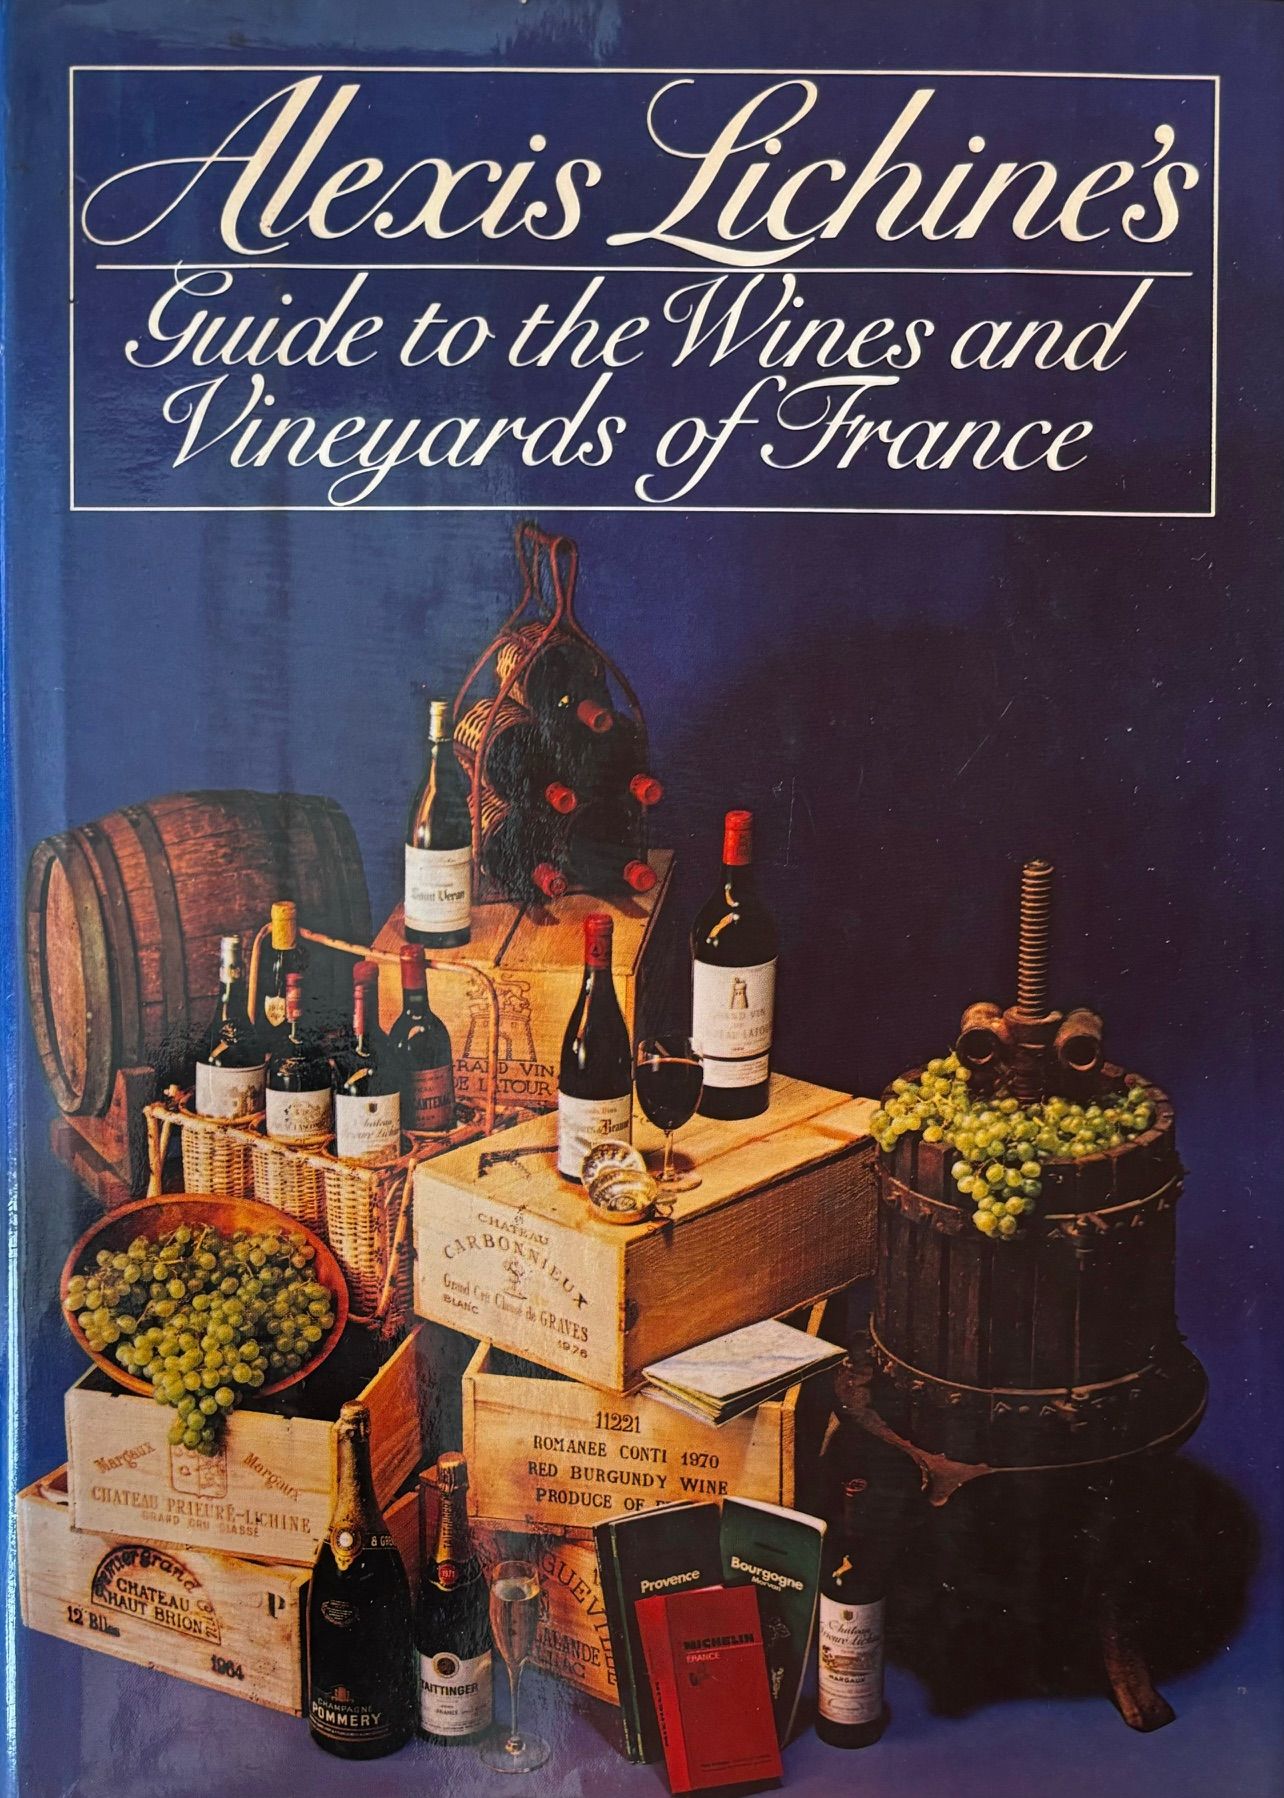 (*NEW ARRIVAL*) (Wine) Alexis Lichine. Alexis Lichine's Guide to the Wines and Vineyards of France. *Signed*